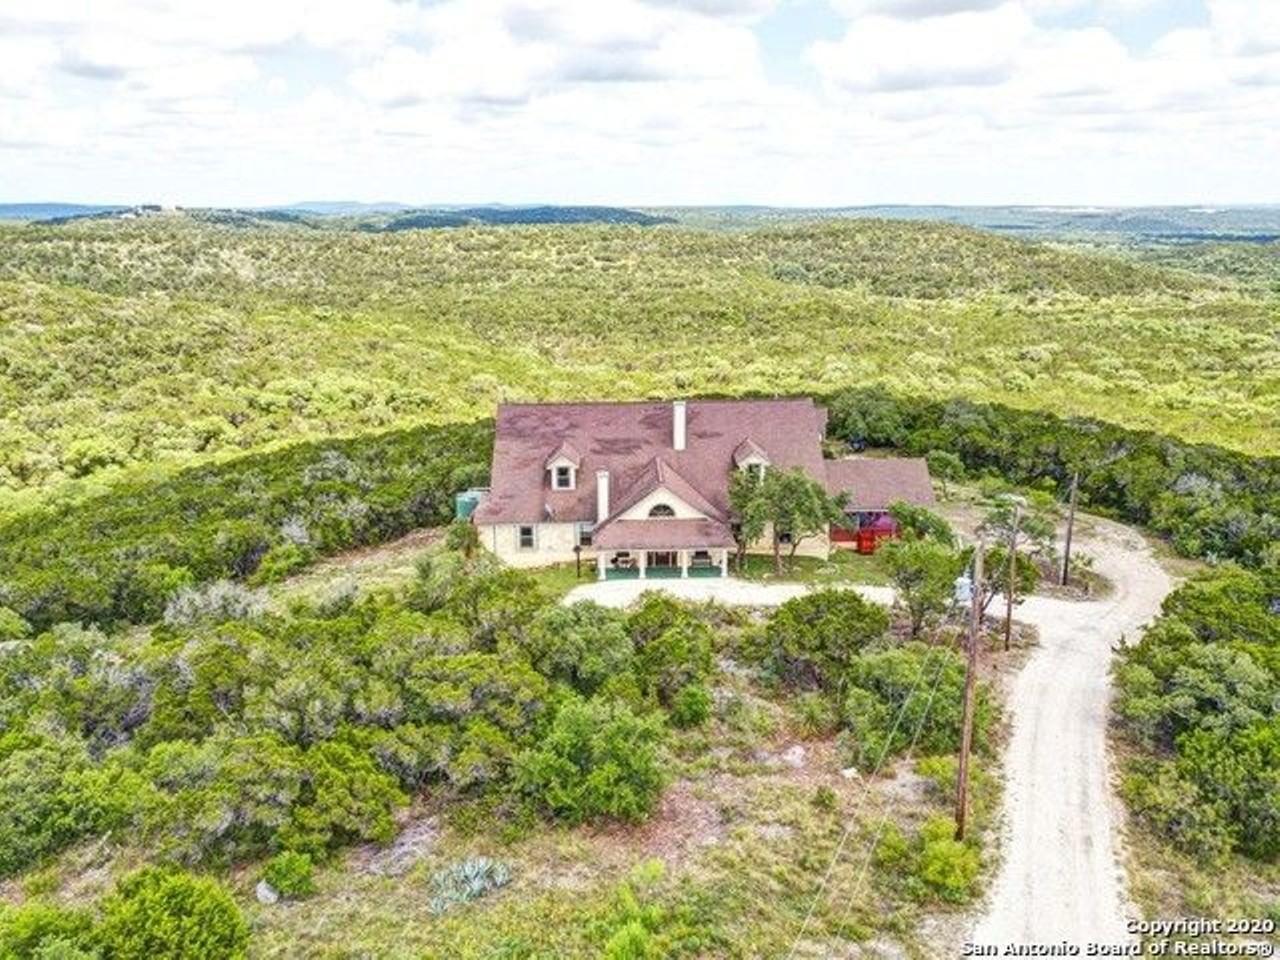 A Secluded Home for Sale Outside San Antonio Looks Like a Cult-Leader's Compound